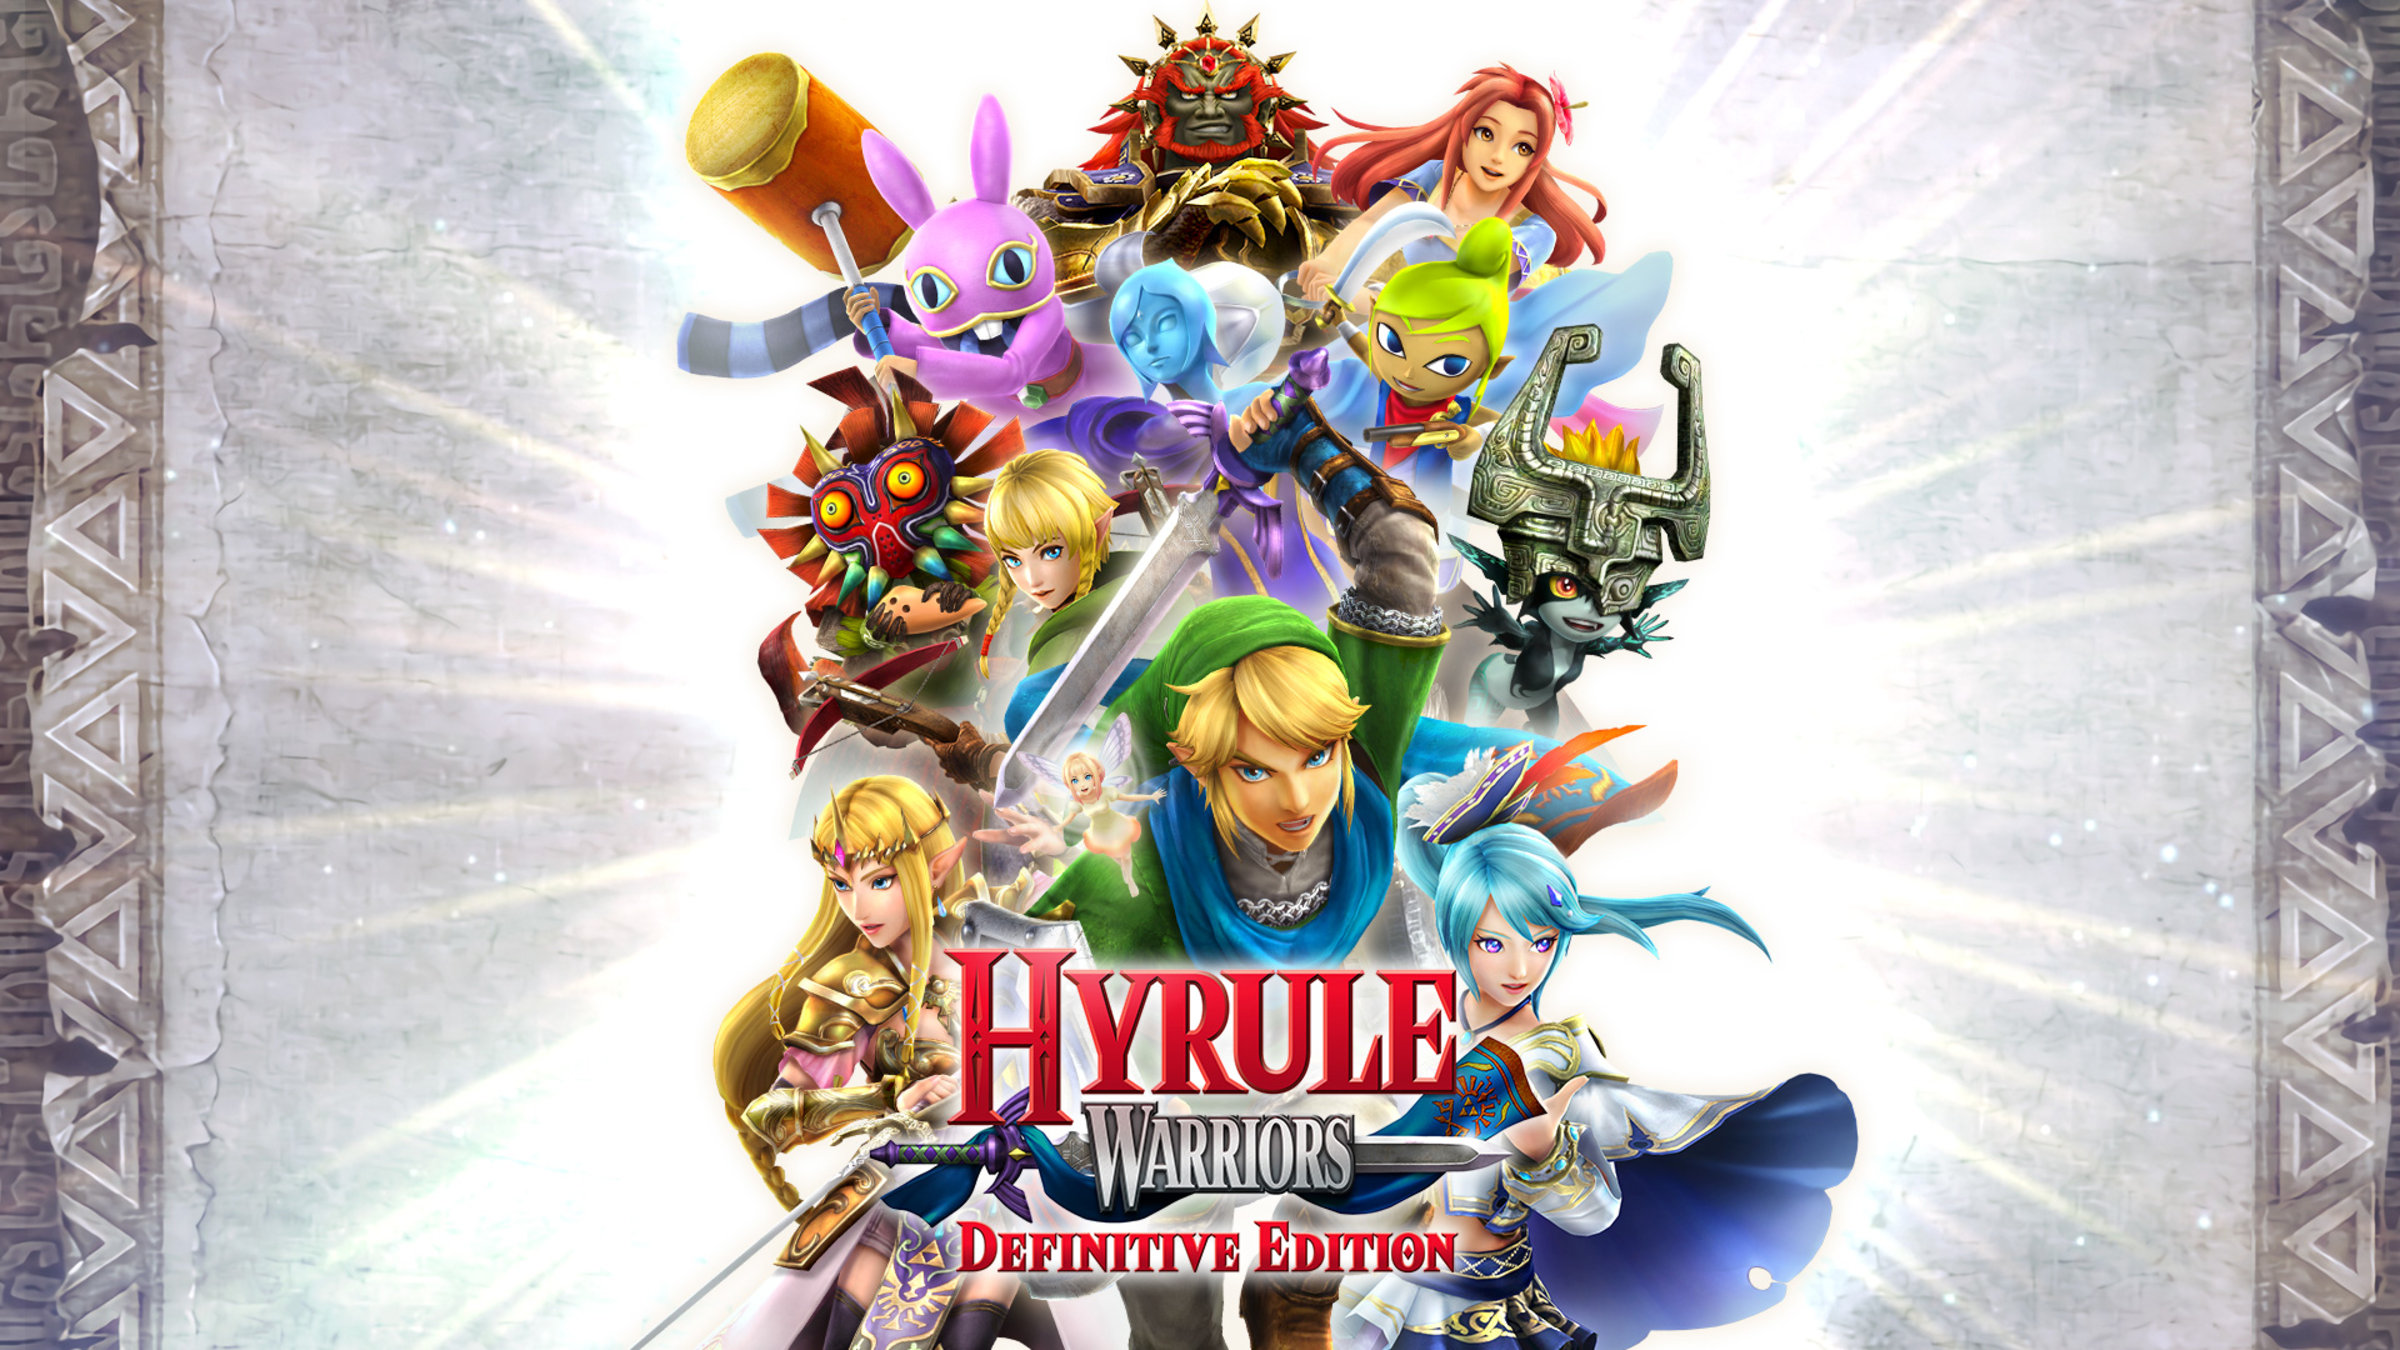 Hyrule Warriors: Definitive Edition Announced For The Nintendo Switch